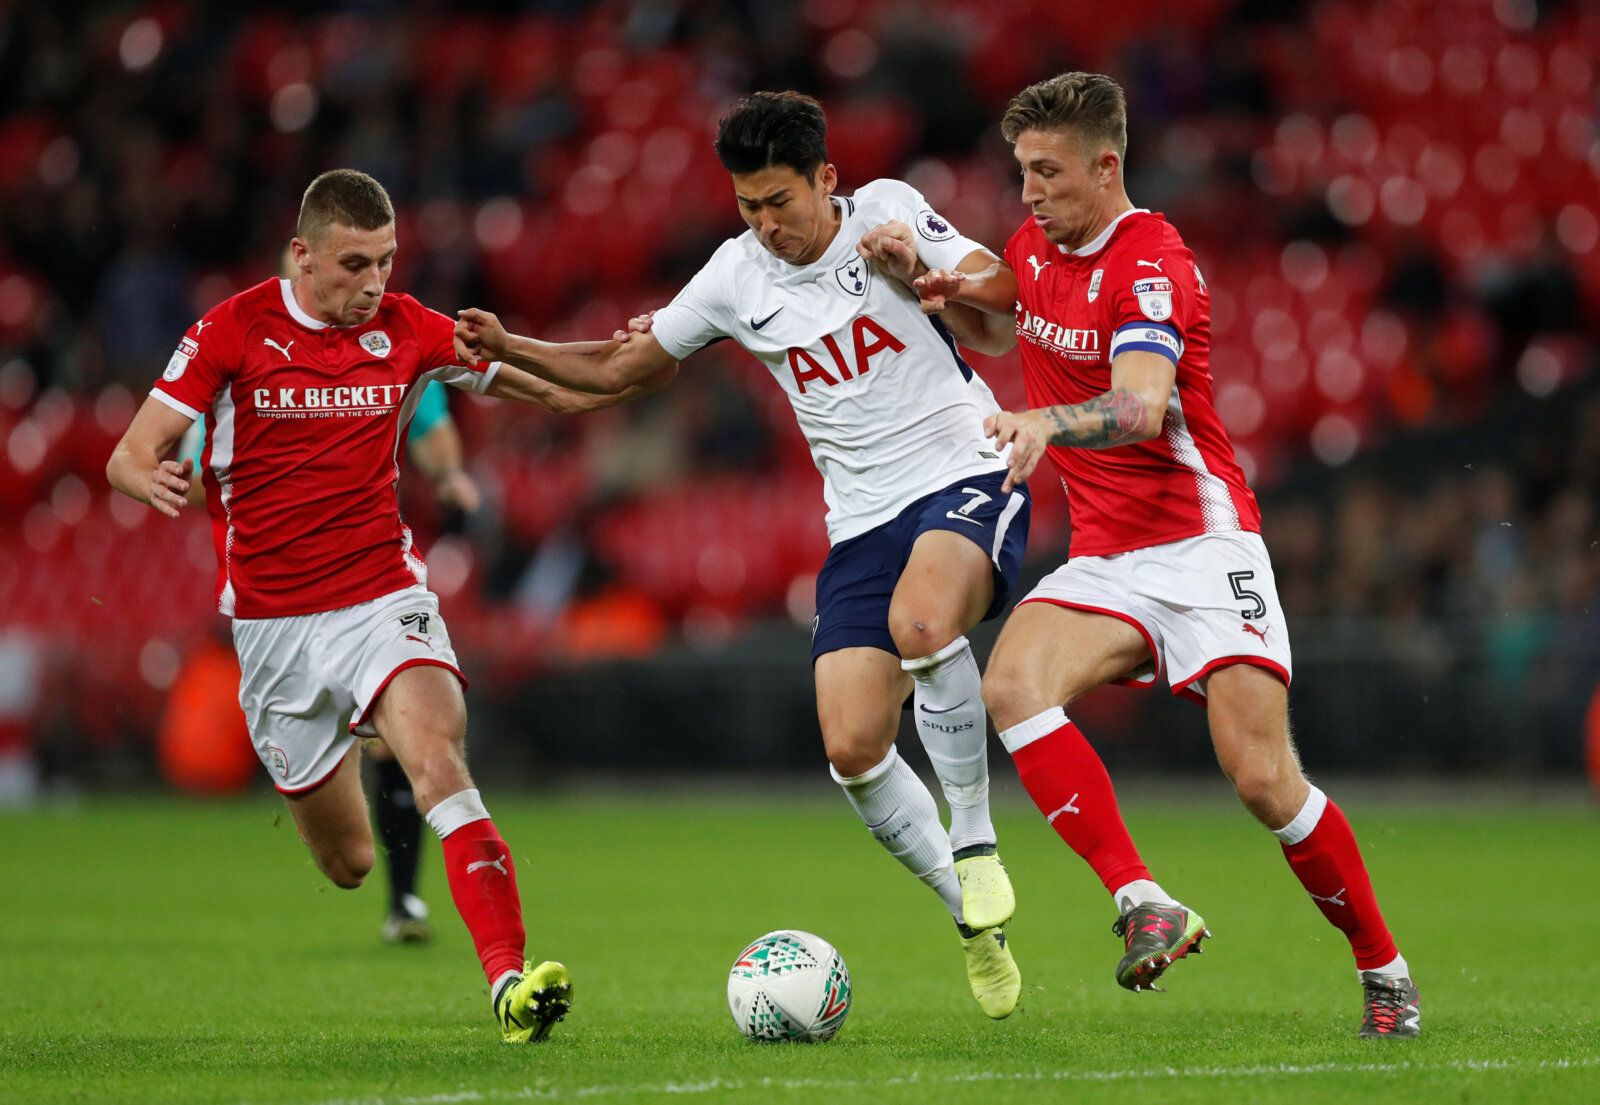 Soccer Football - Carabao Cup Third Round - Tottenham Hotspur vs Barnsley - Wembley Stadium, London, Britain - September 19, 2017   Tottenham's Son Heung-min in action with Barnsley's Angus MacDonald and Joe Williams    Action Images via Reuters/Matthew Childs   EDITORIAL USE ONLY. No use with unauthorized audio, video, data, fixture lists, club/league logos or 